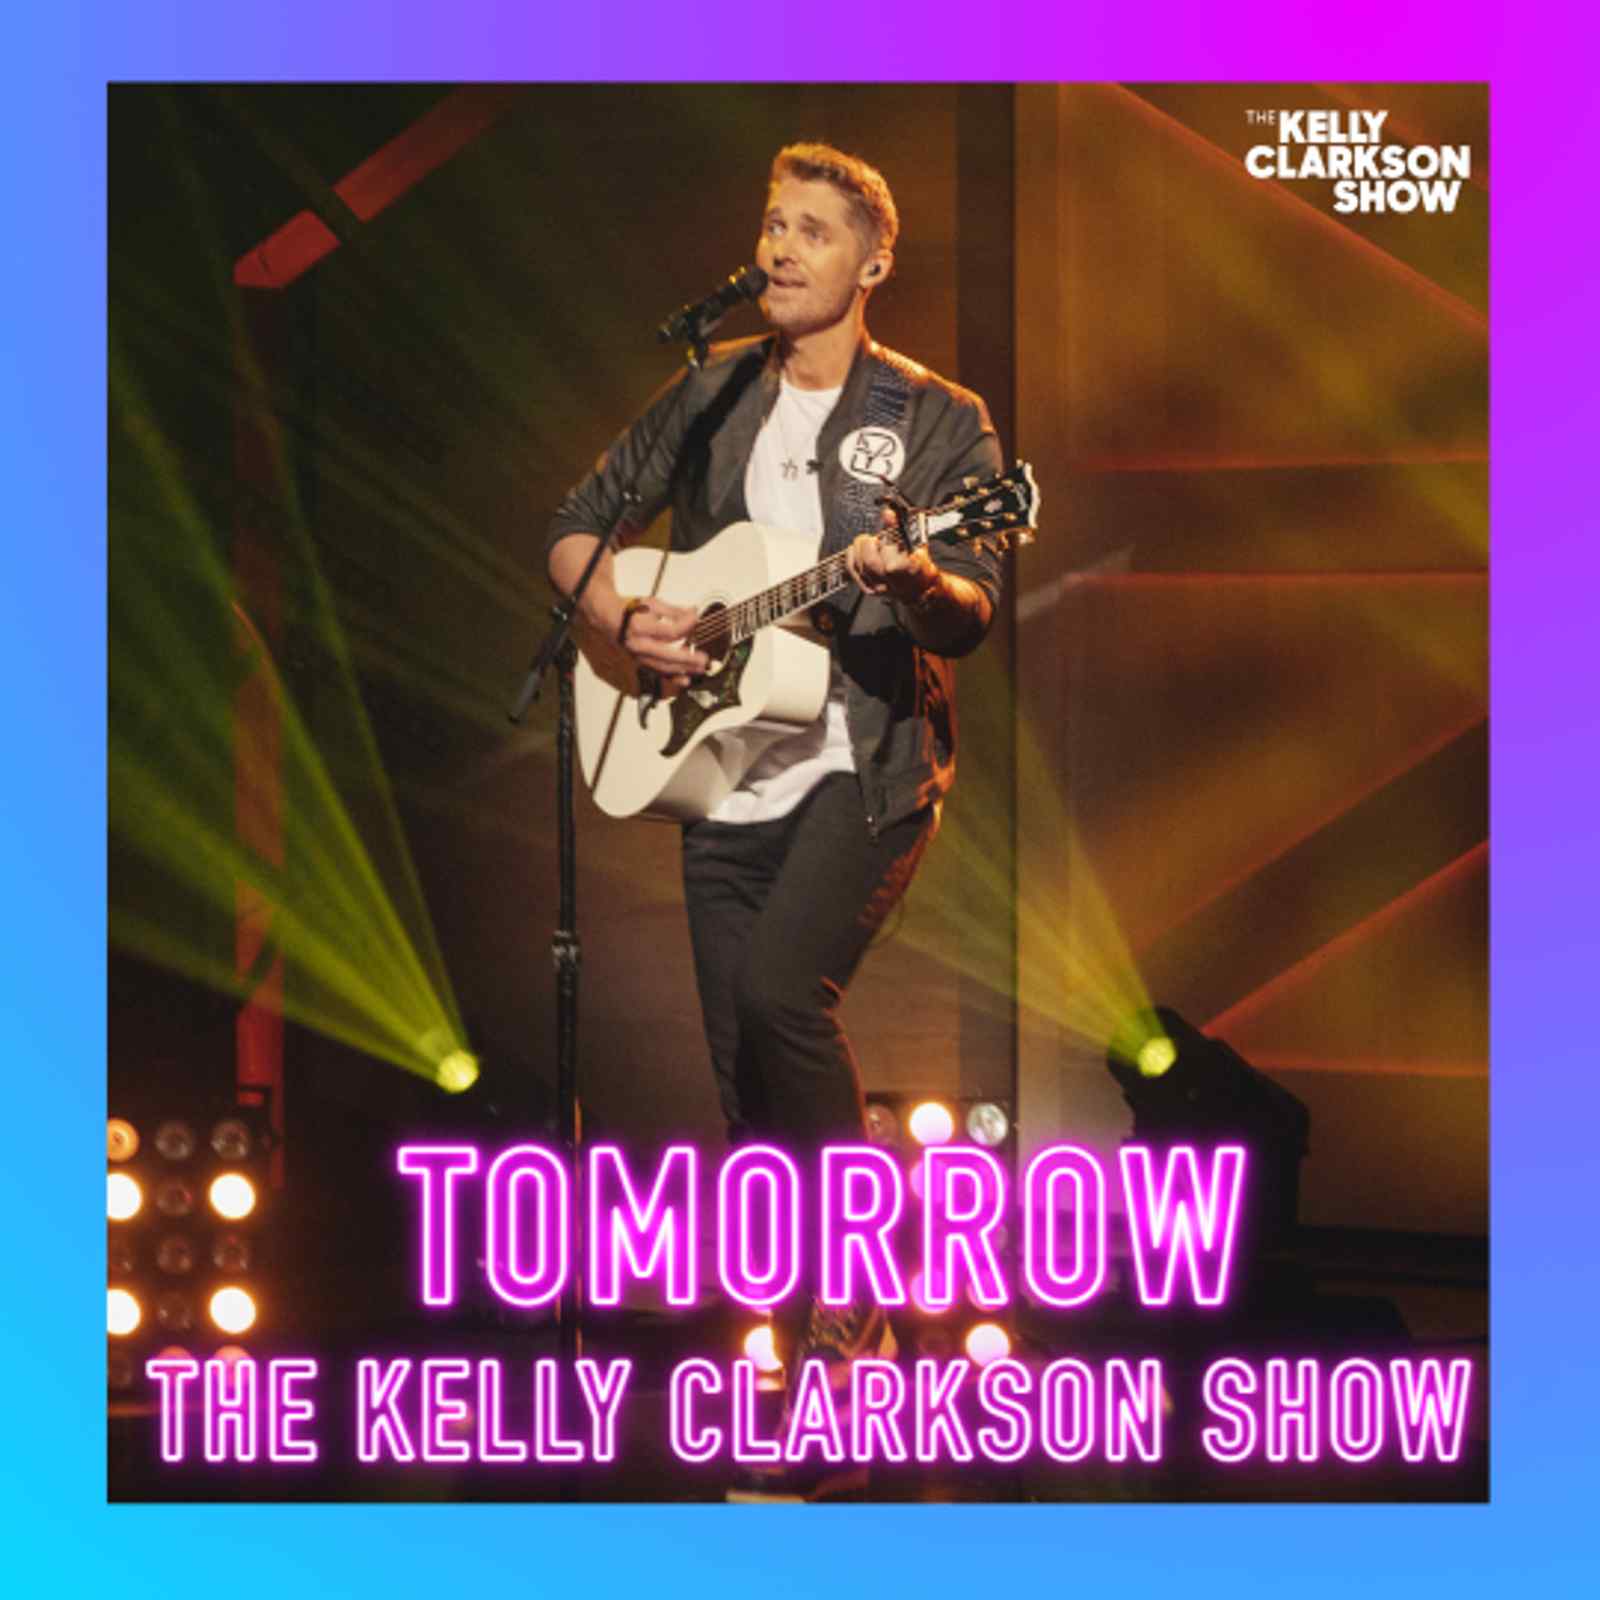 The Kelly Clarkson Show: Brett Young